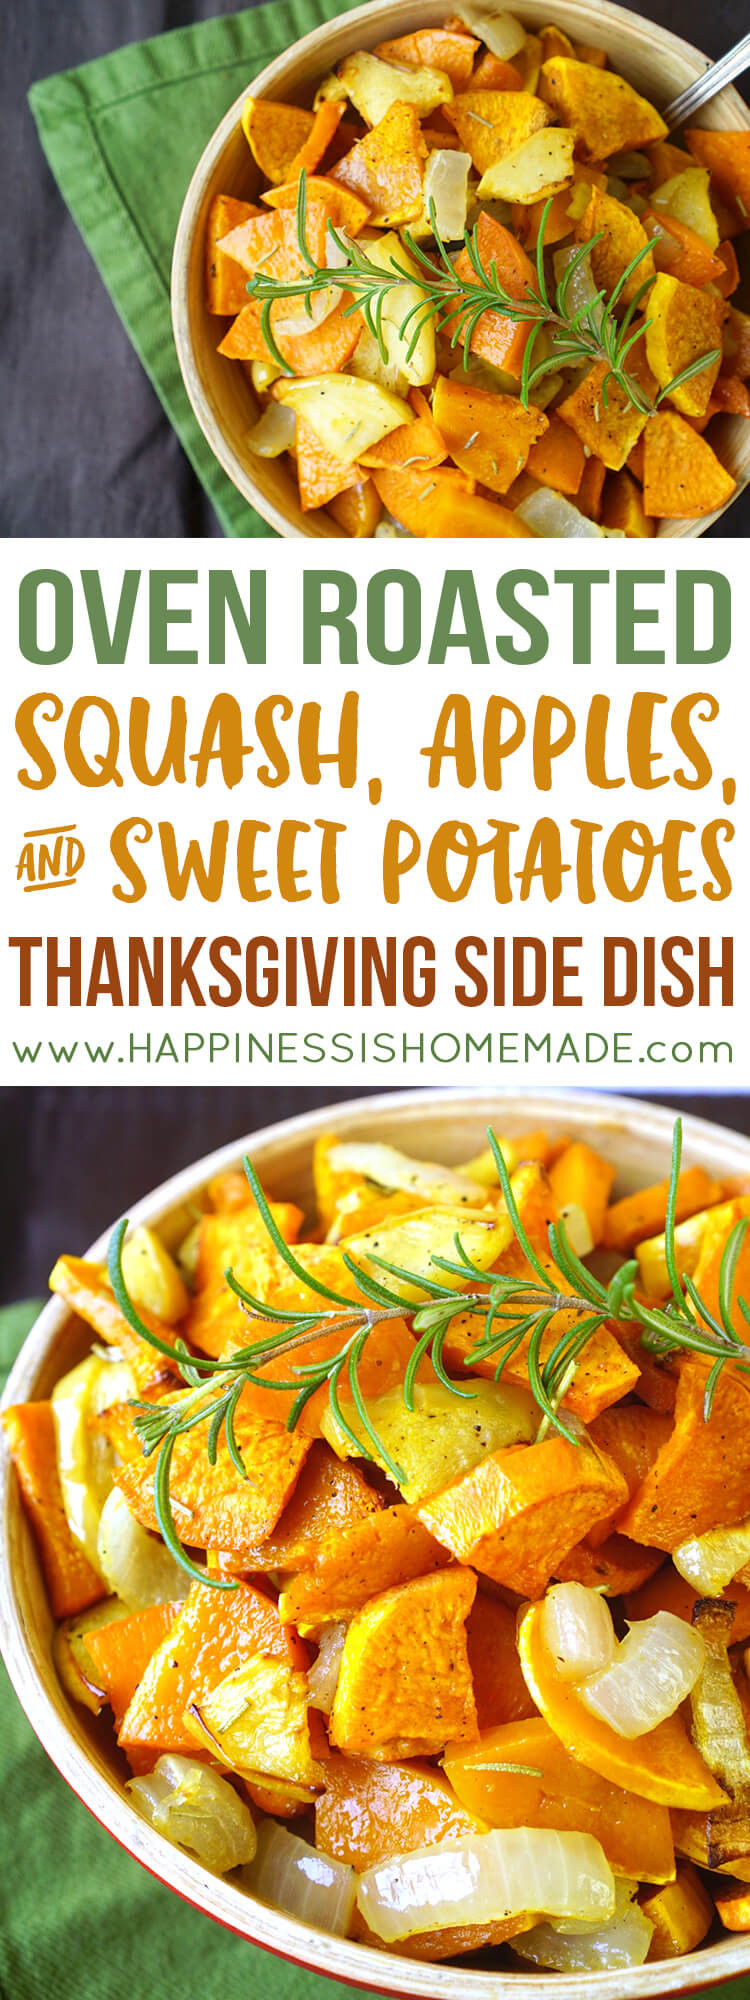 Thanksgiving Roasted Potatoes
 Roasted Sweet Potatoes Squash & Apples Happiness is